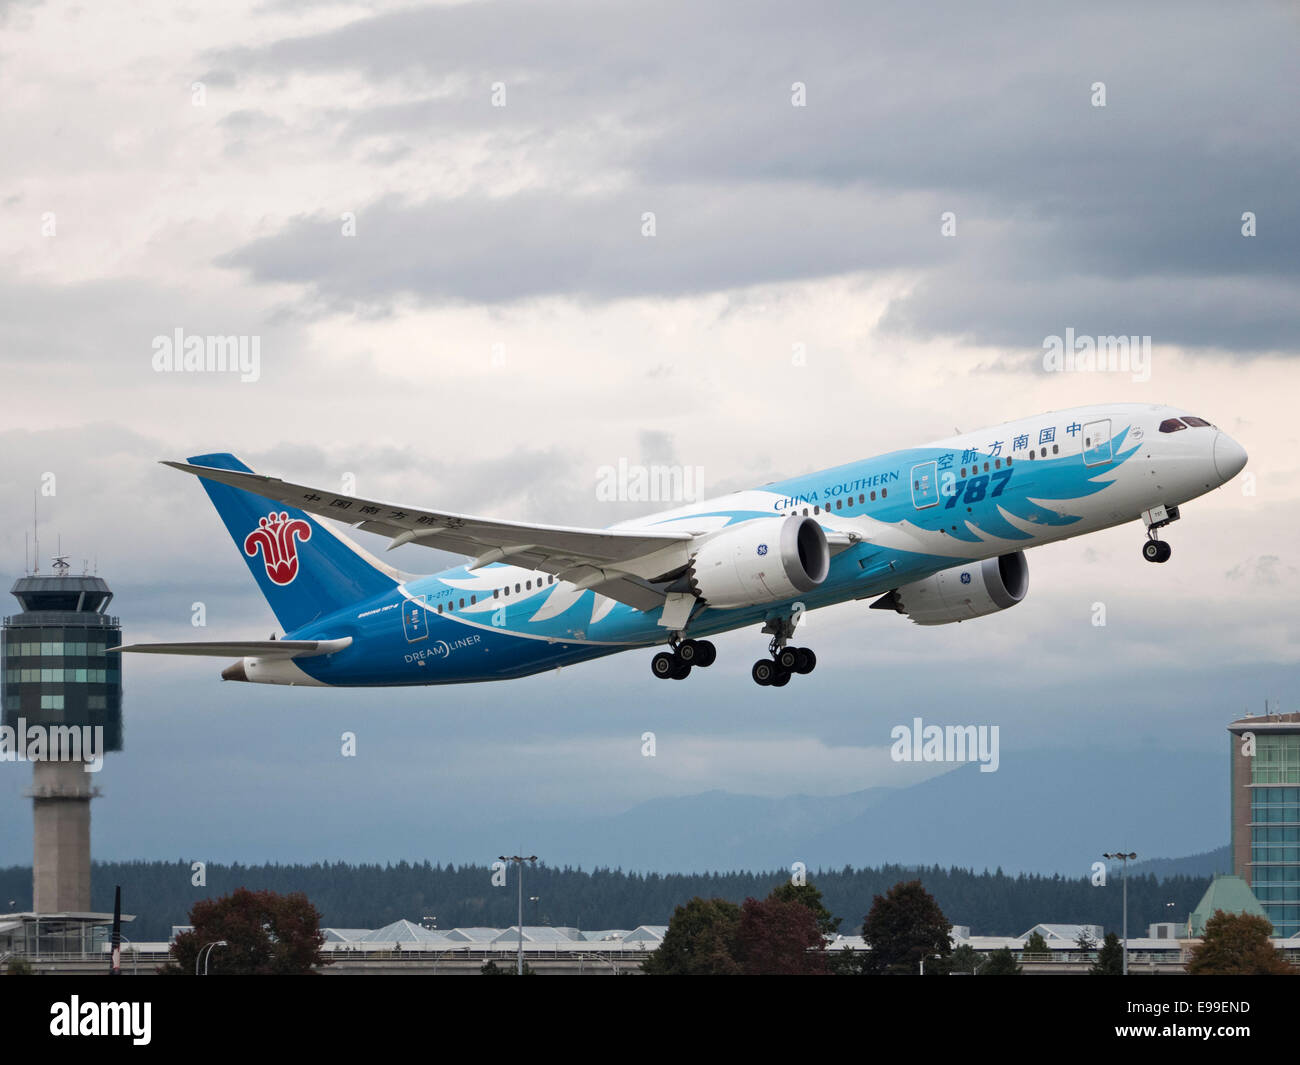 A China Southern Airlines Boeing 787-8 Dreamliner jetliner takes off from Vancouver International Airport. Stock Photo